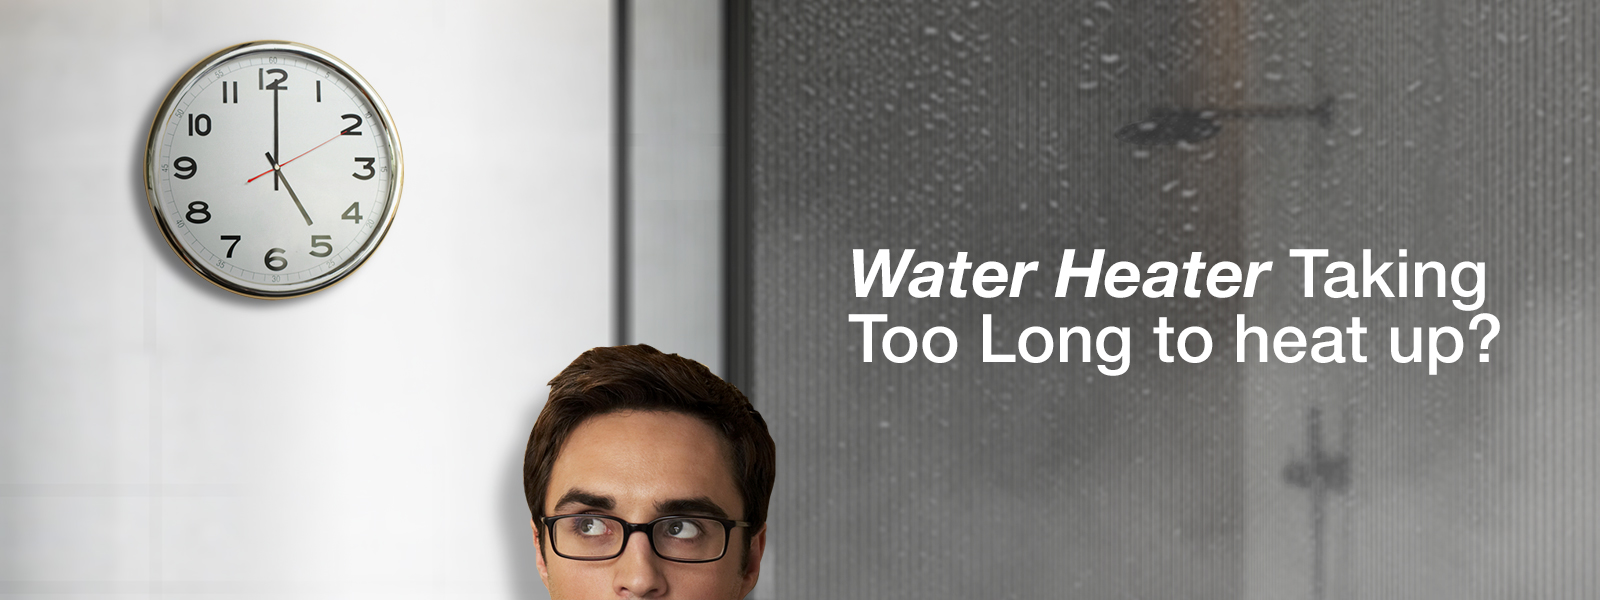 Is Your Water Heater Taking Too Long to Heat Up?